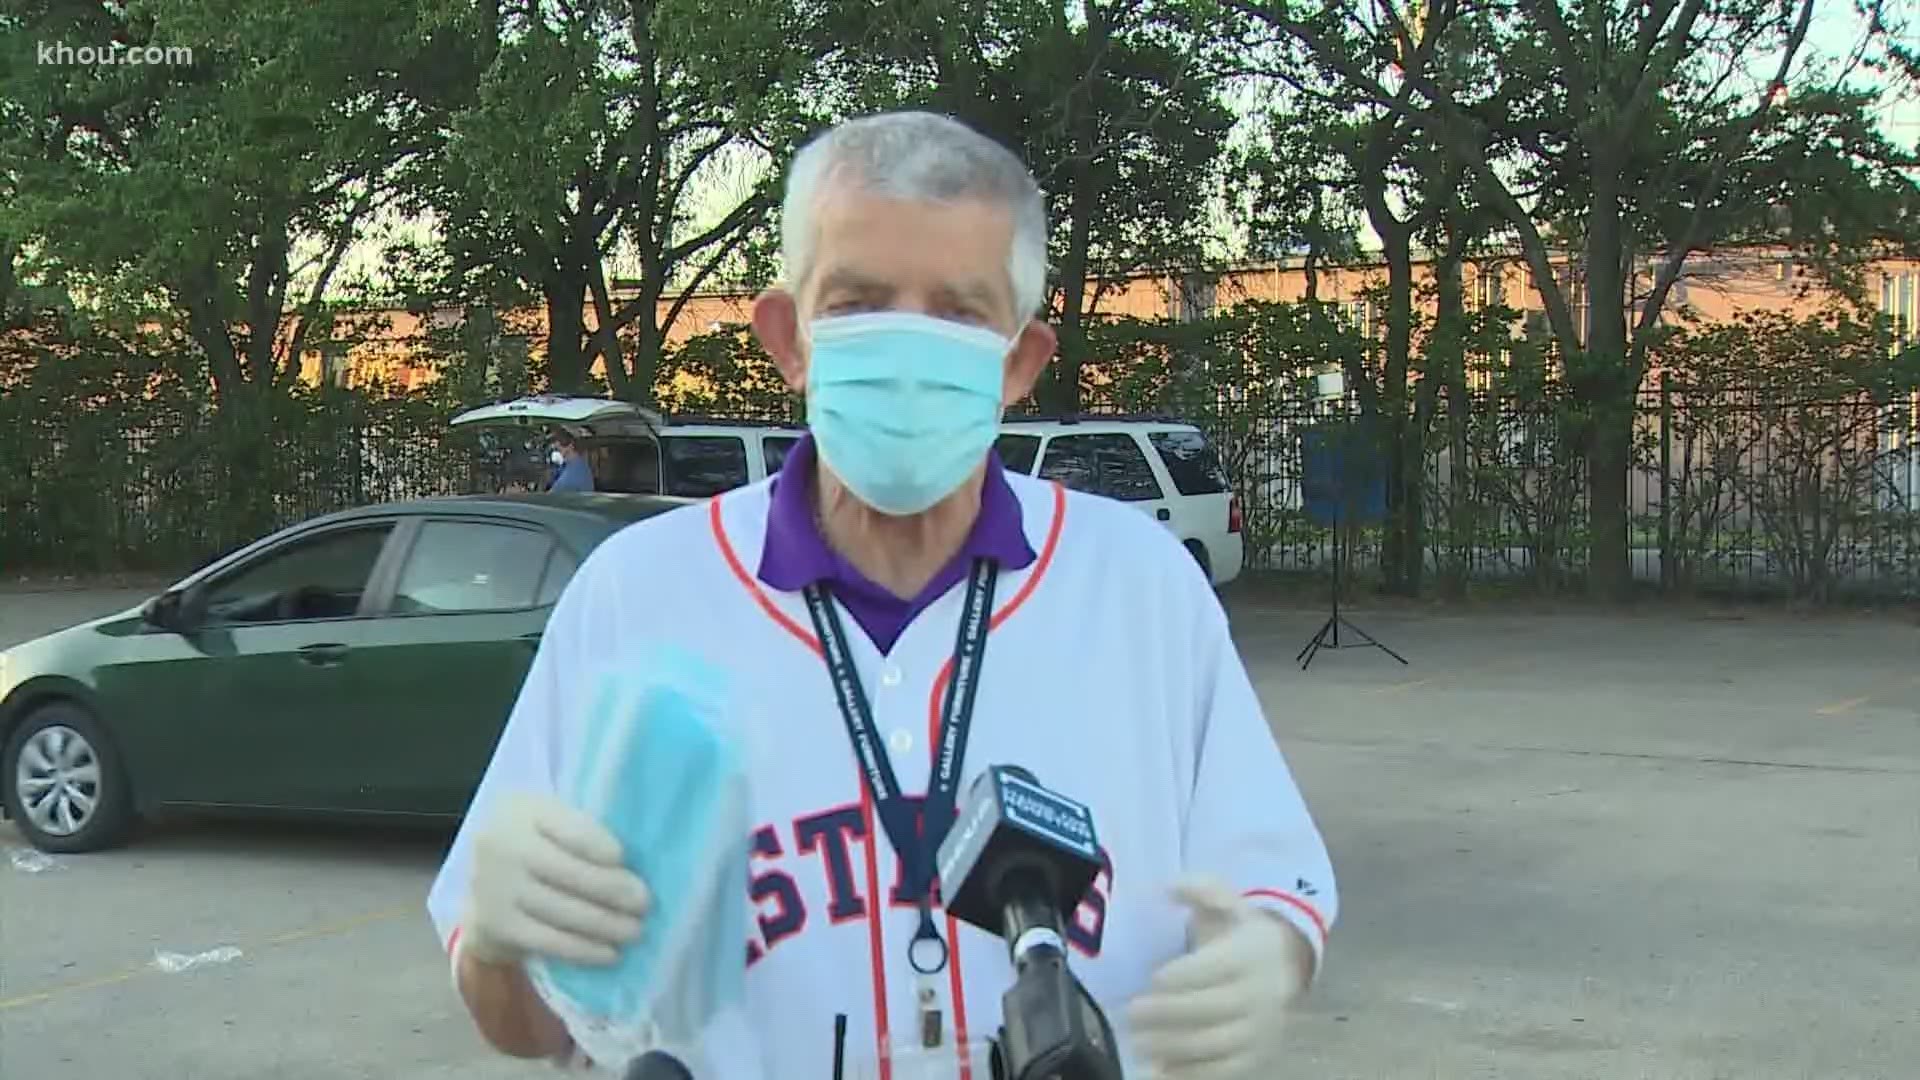 Mattress Mack is using his resources to provide residents with free masks amid a nationwide shortage.